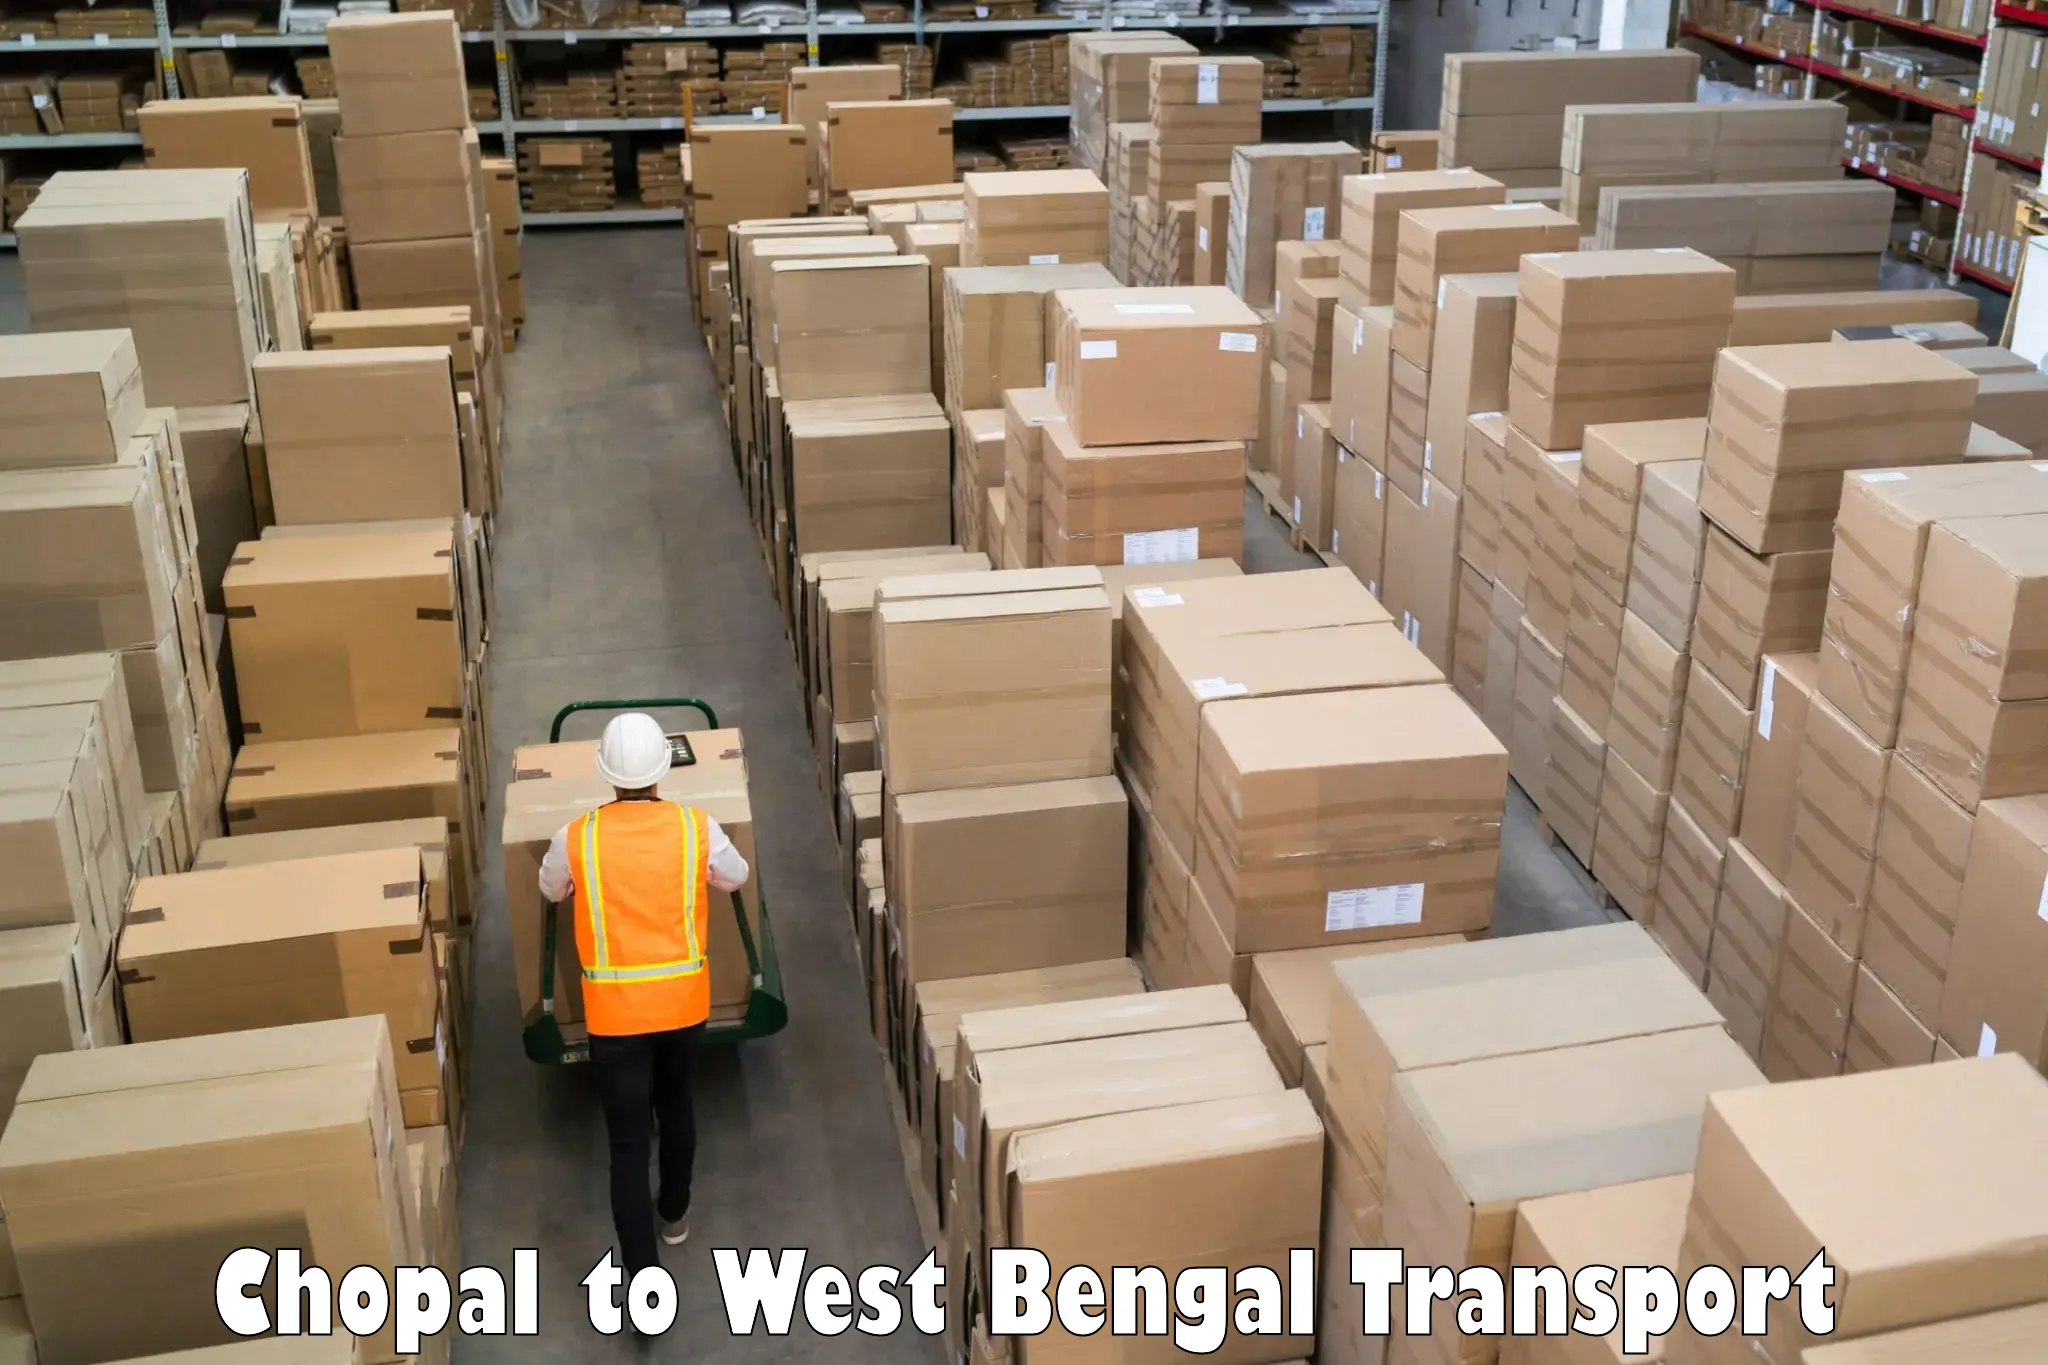 Truck transport companies in India Chopal to Surjapur